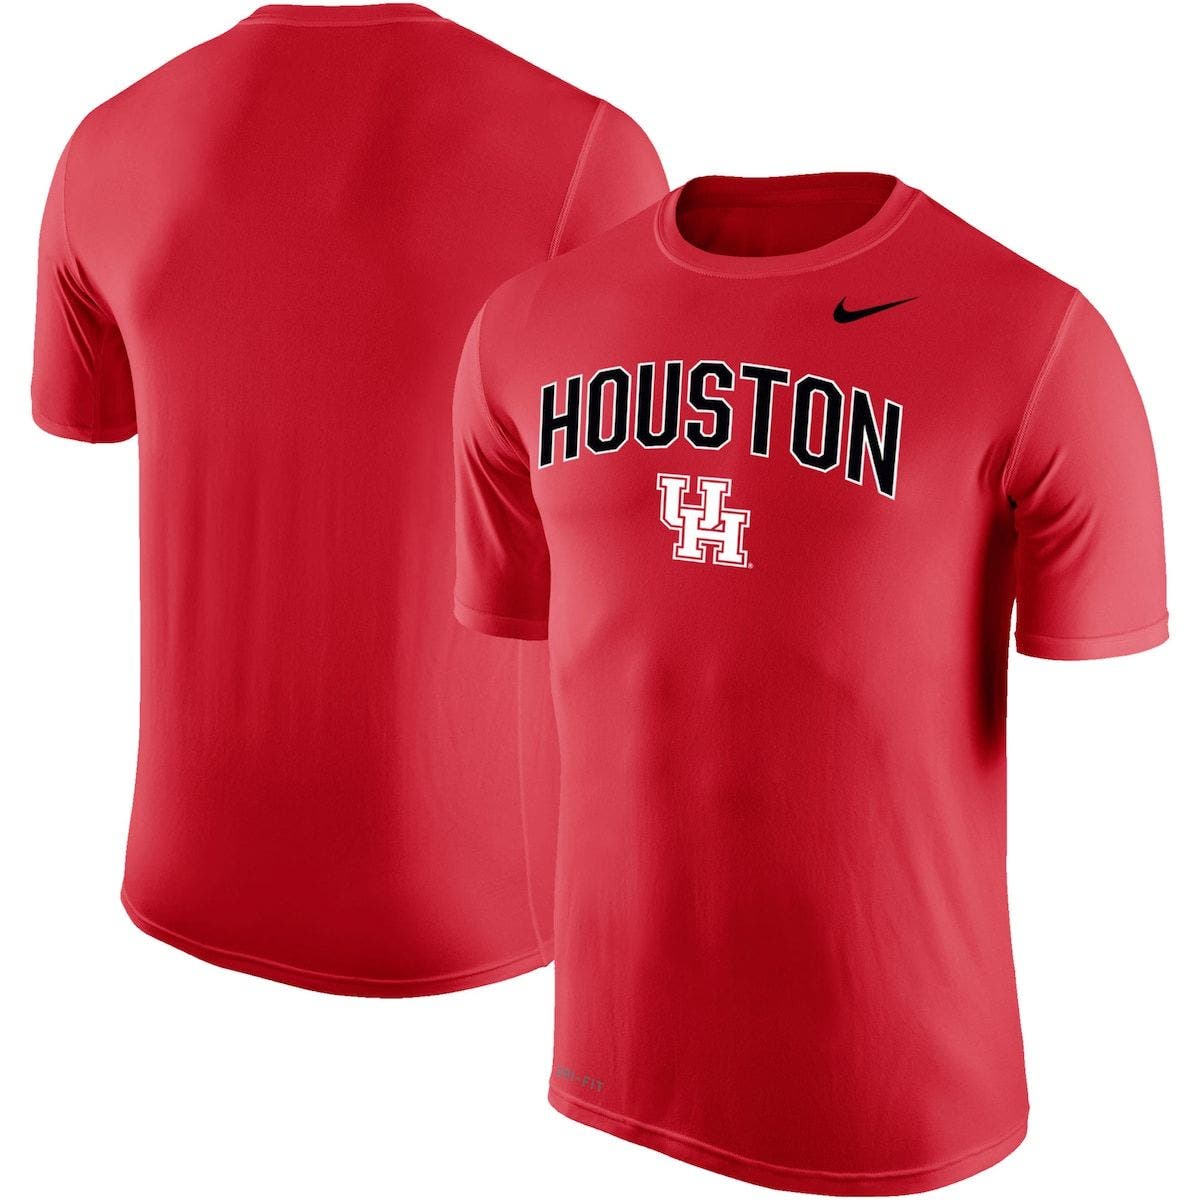 Men's Nike Red Houston Cougars Arch Over Logo Performance T-Shirt